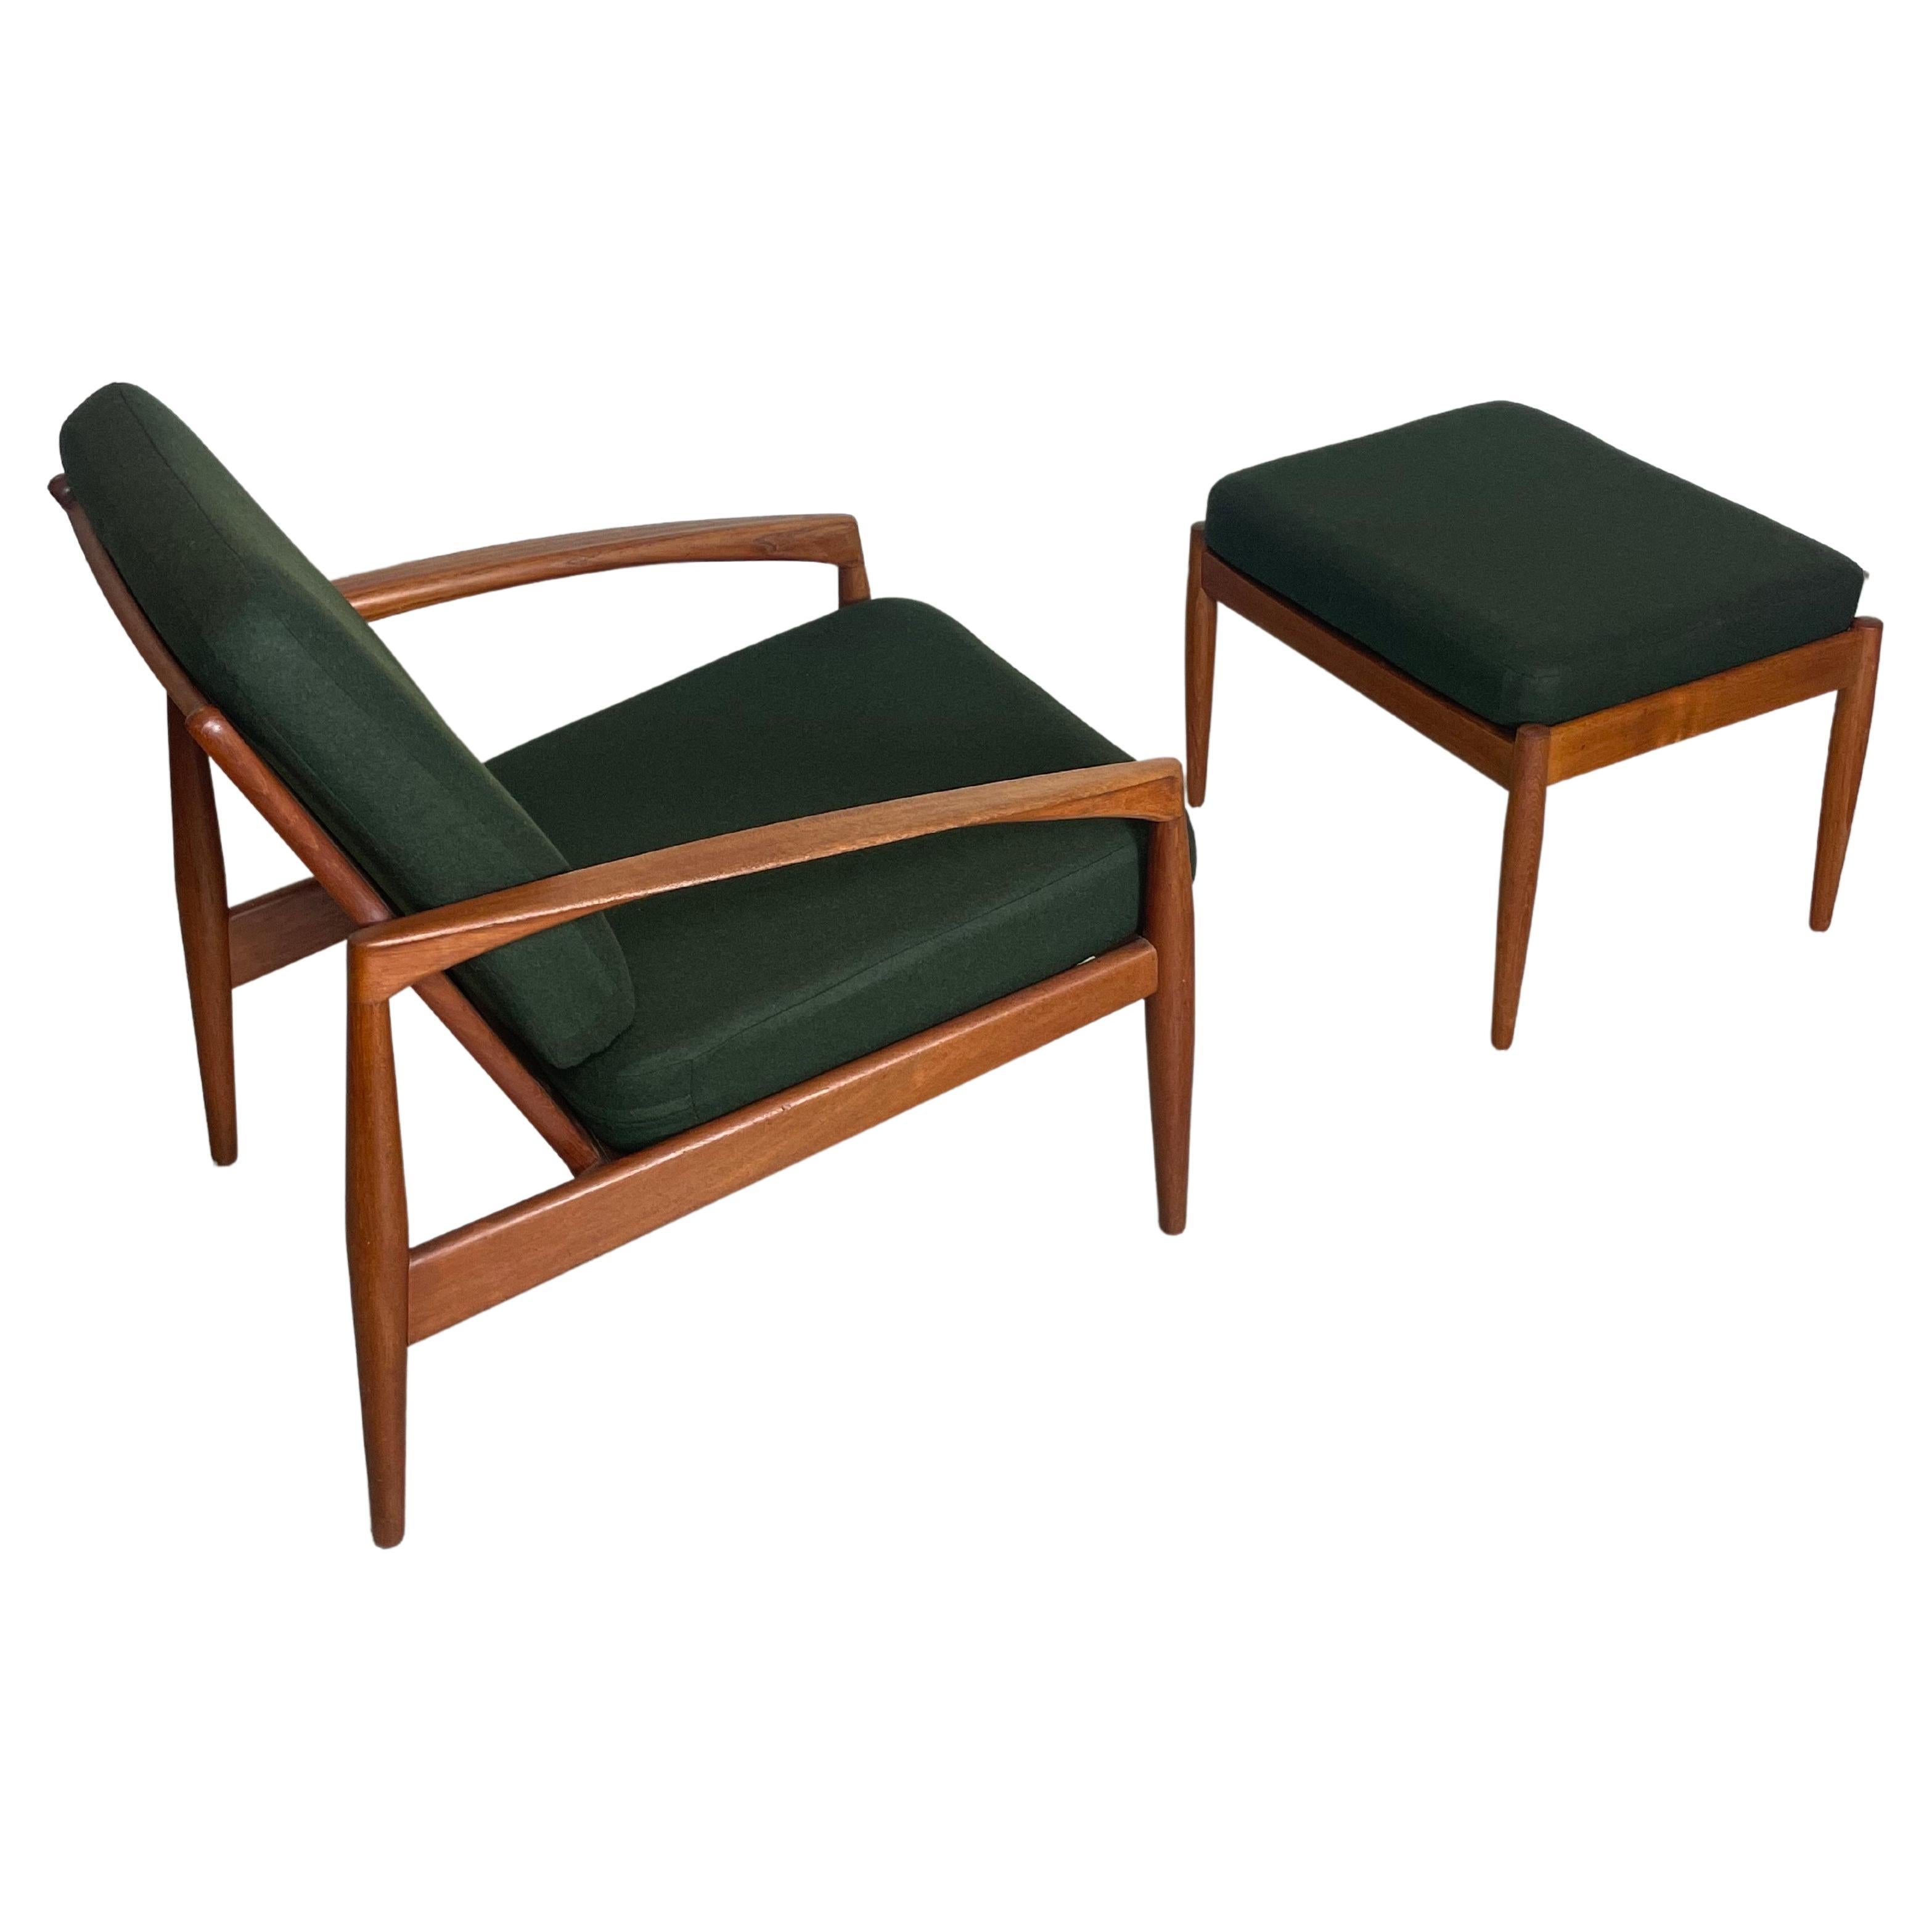 Mid-century easy chair designed by Kai Kristiansen. This model Paper Knife features a maching foot stool (ottoman) which can be also used as a beside table.
This is a set made of solid teak wood, we have restored it completely, with new new